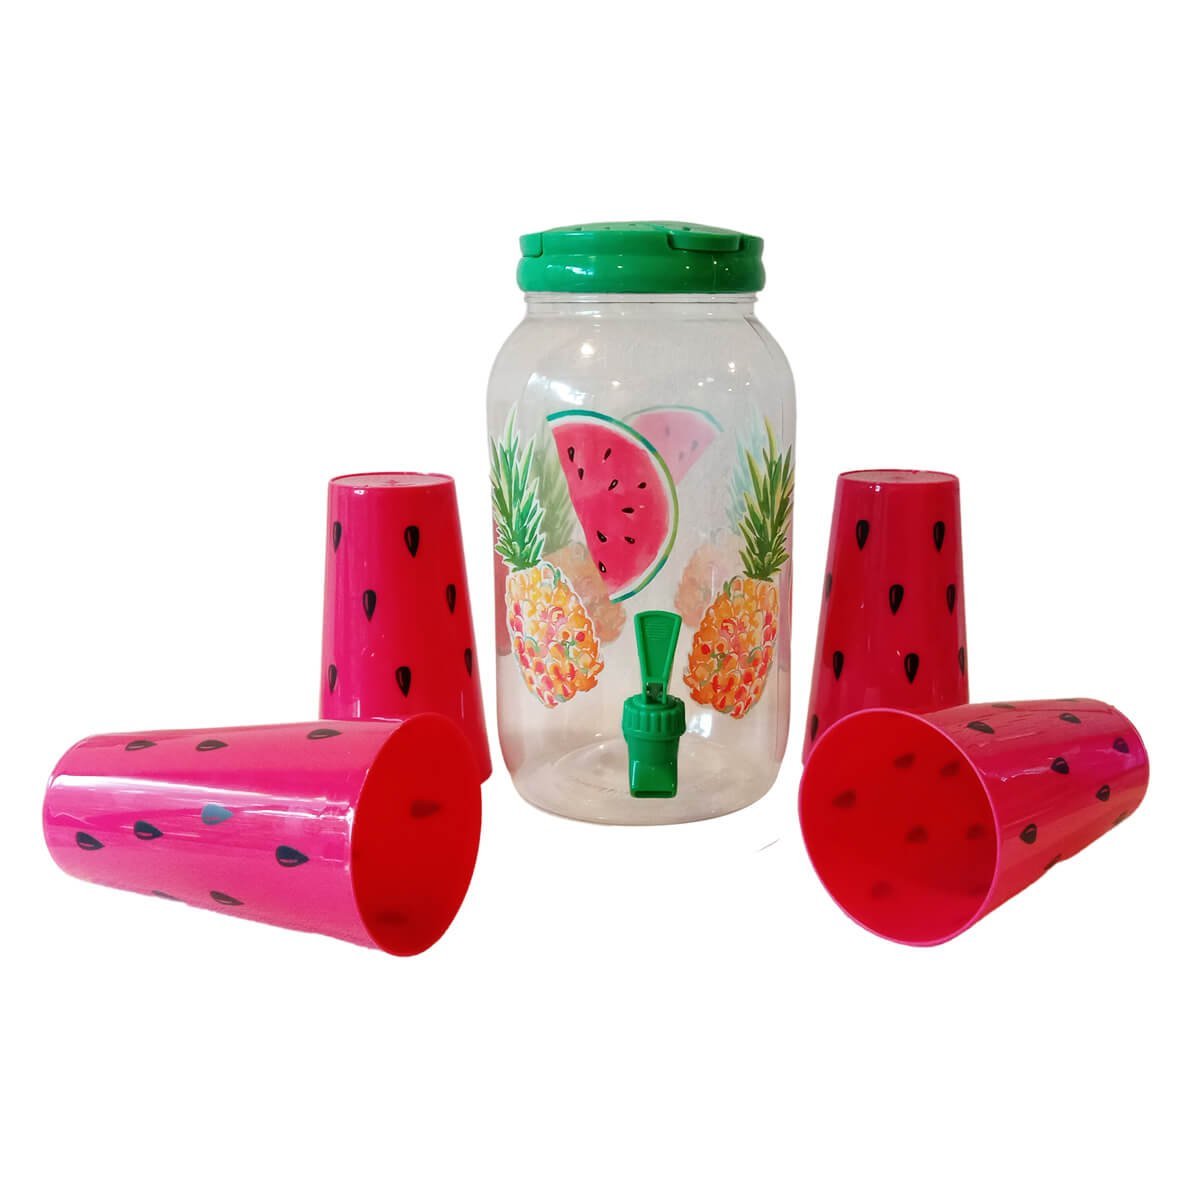 Watermelon Water Dispenser with 4 Glasses - Little Surprise BoxWatermelon Water Dispenser with 4 Glasses